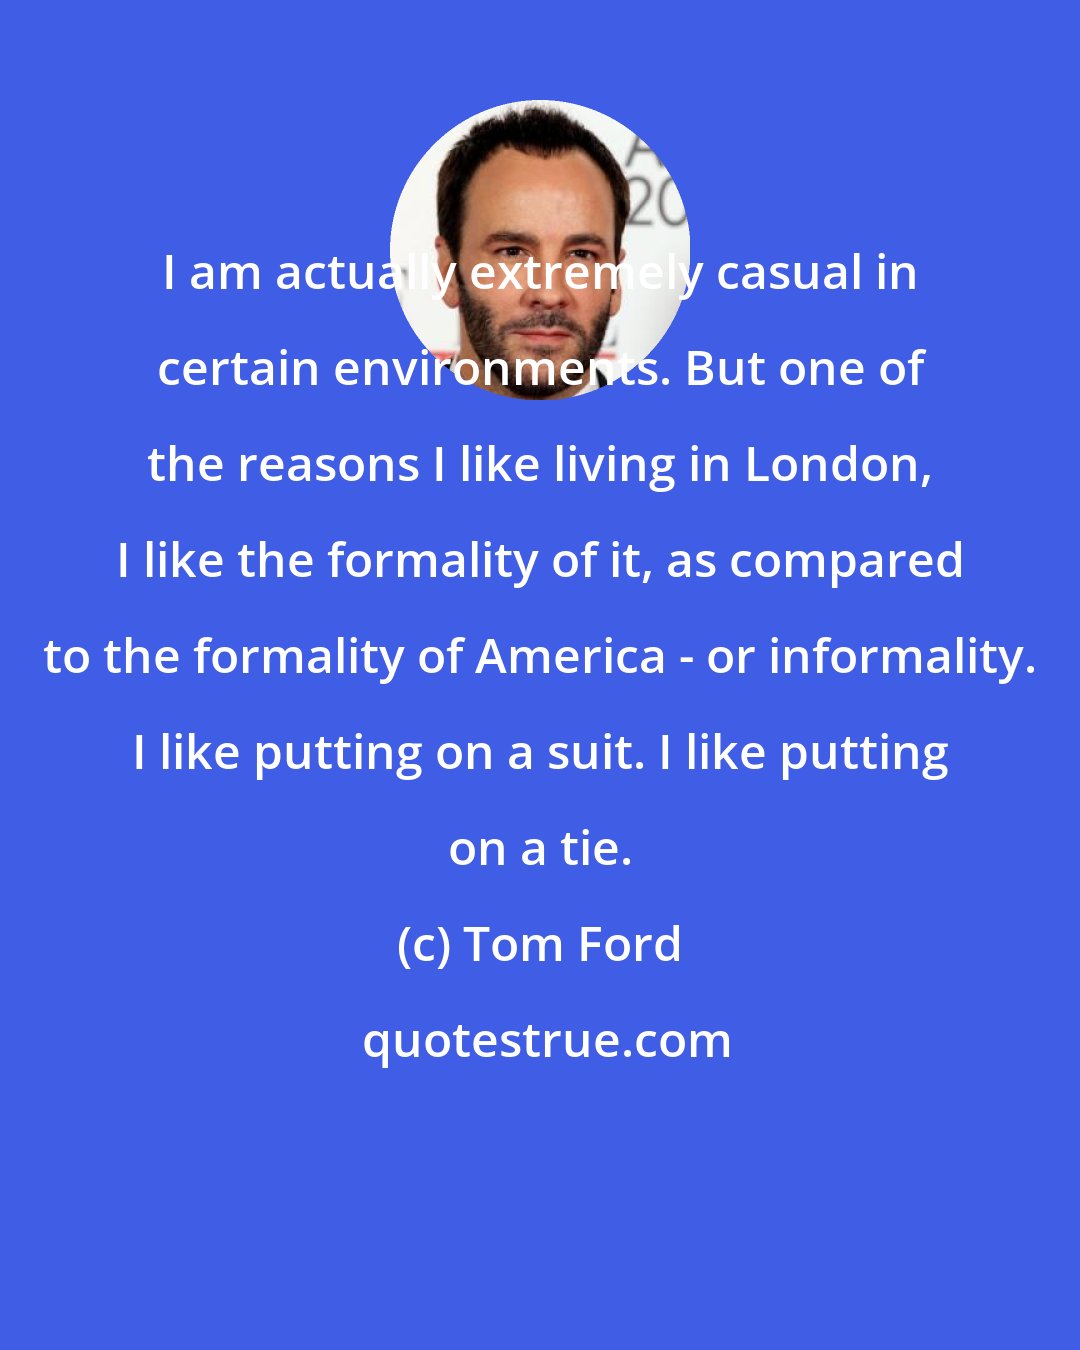 Tom Ford: I am actually extremely casual in certain environments. But one of the reasons I like living in London, I like the formality of it, as compared to the formality of America - or informality. I like putting on a suit. I like putting on a tie.